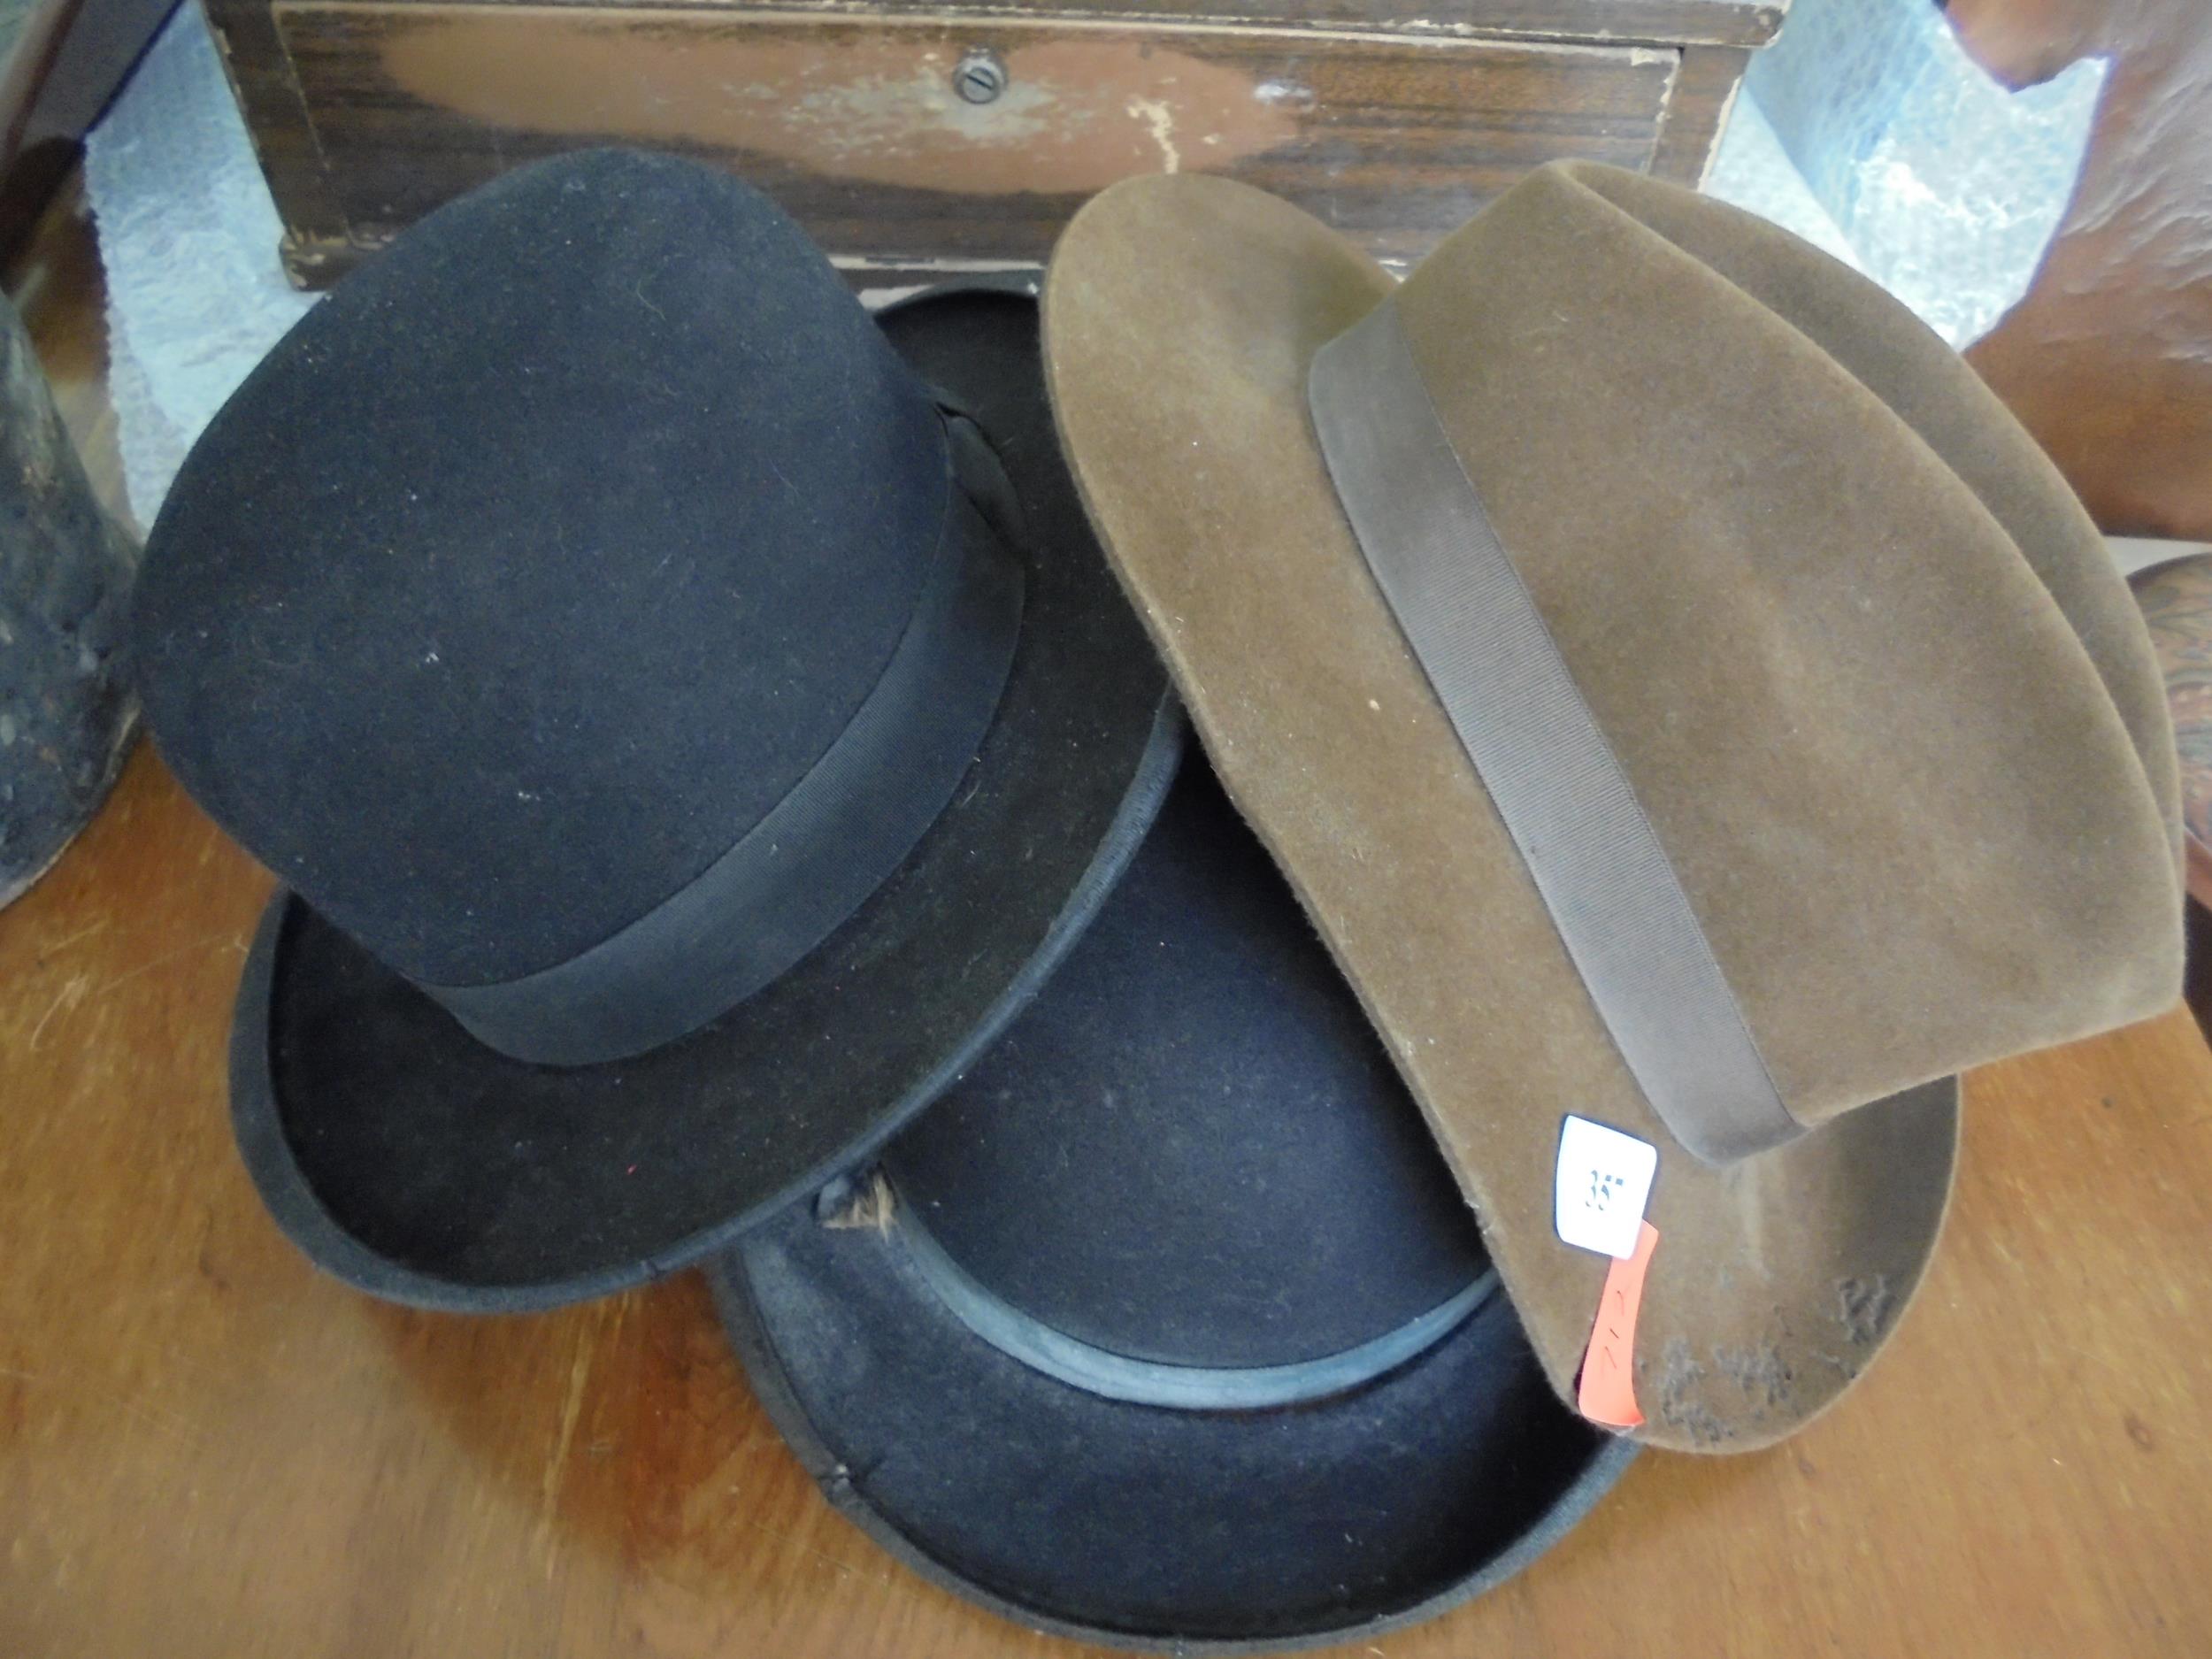 3 bowler hunting hats and trilby